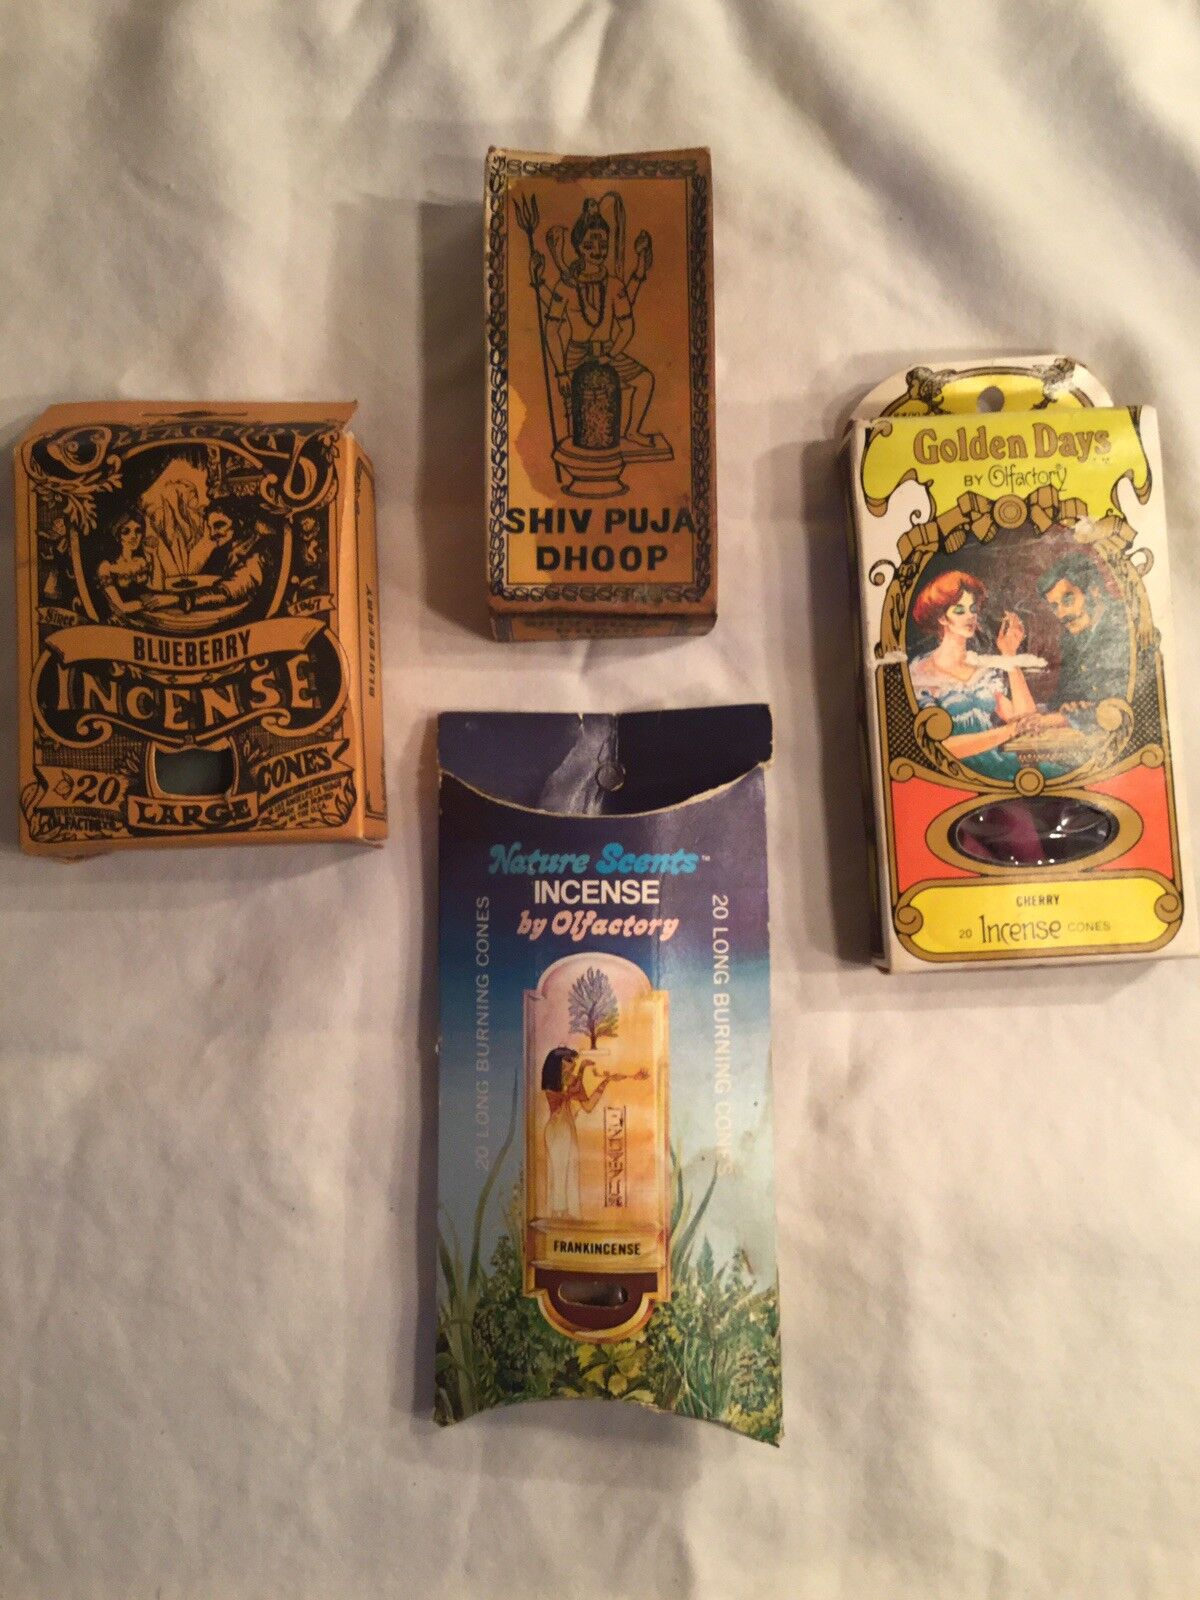 Lot of 4 Incense Vintage never used 70's Shiv Puja Dhoop & olfactory 110 cones